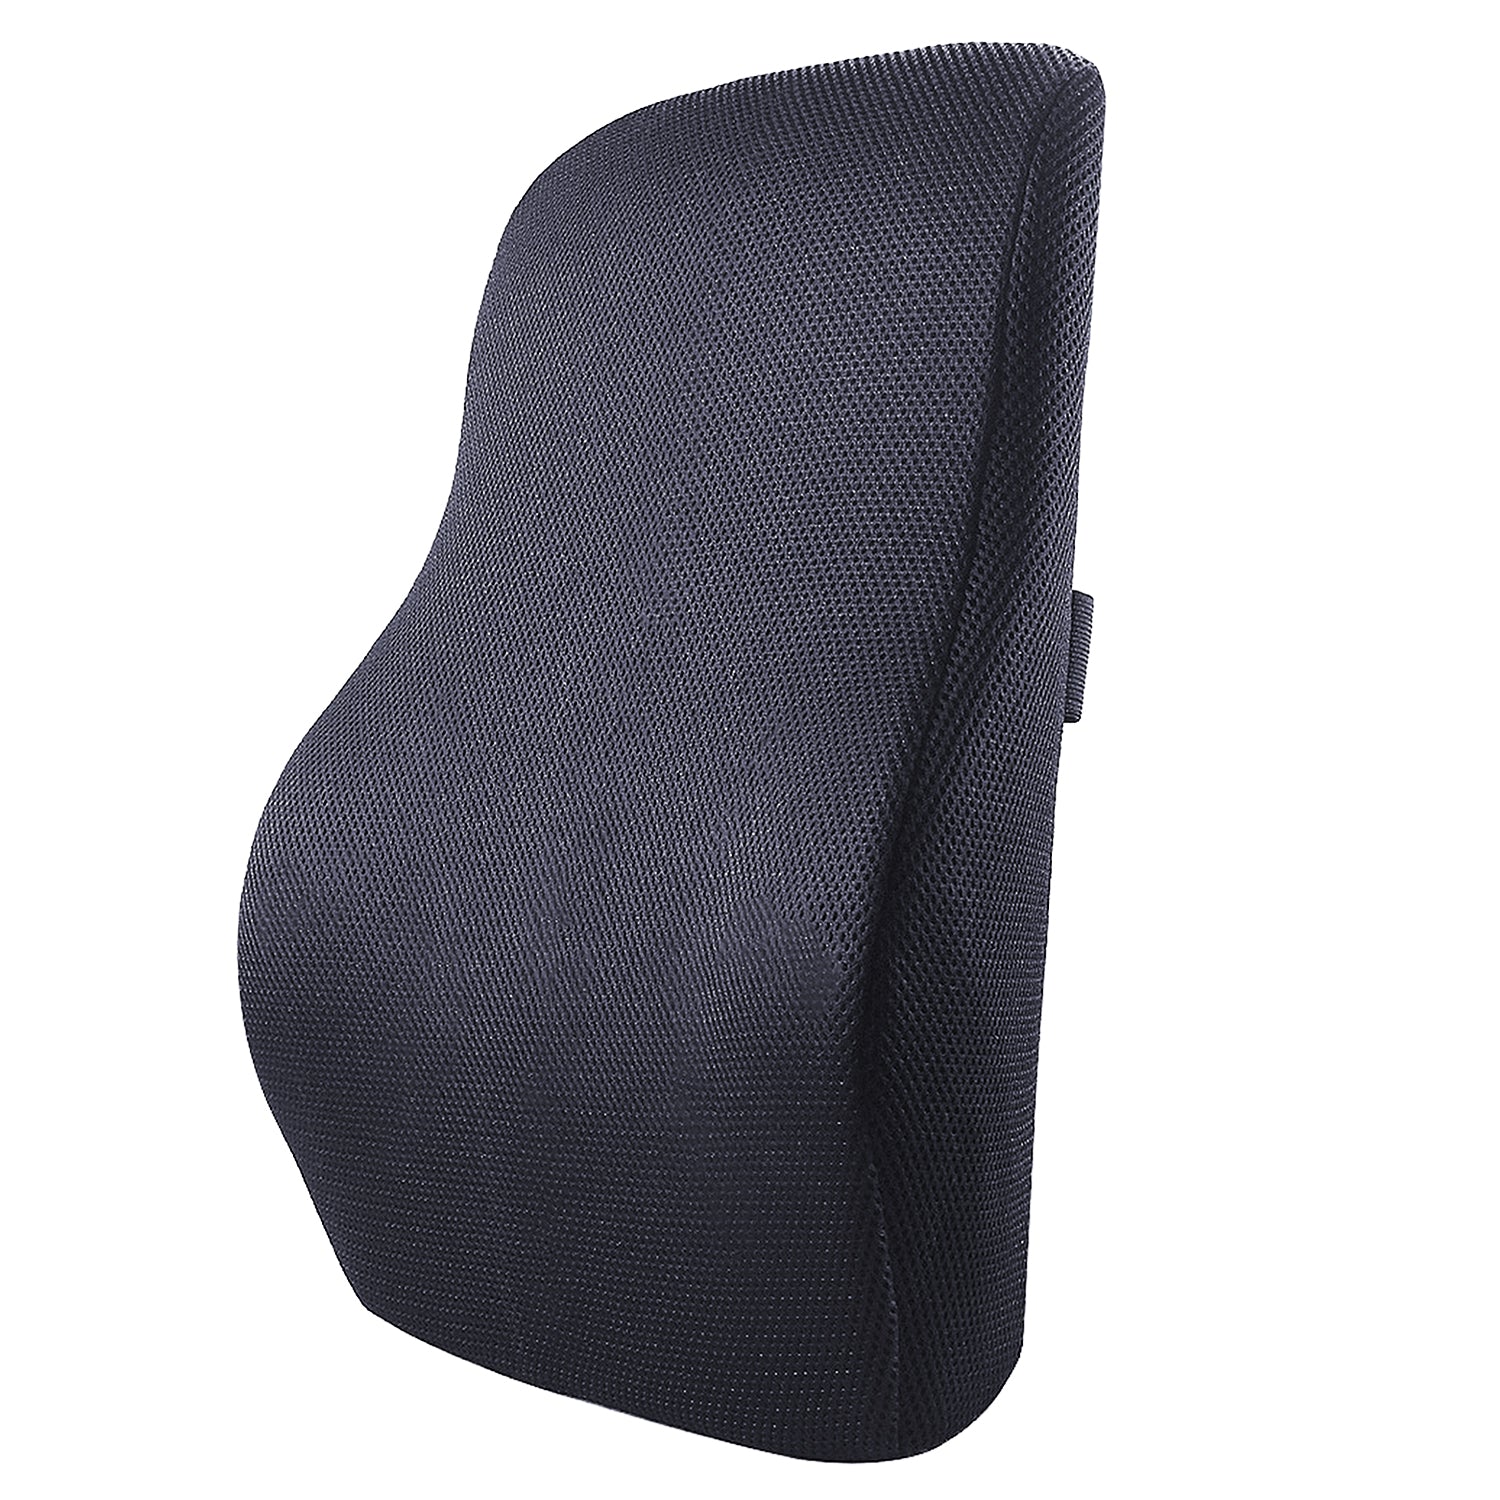 Memory Foam Lumbar Support Back Pillow for Office India